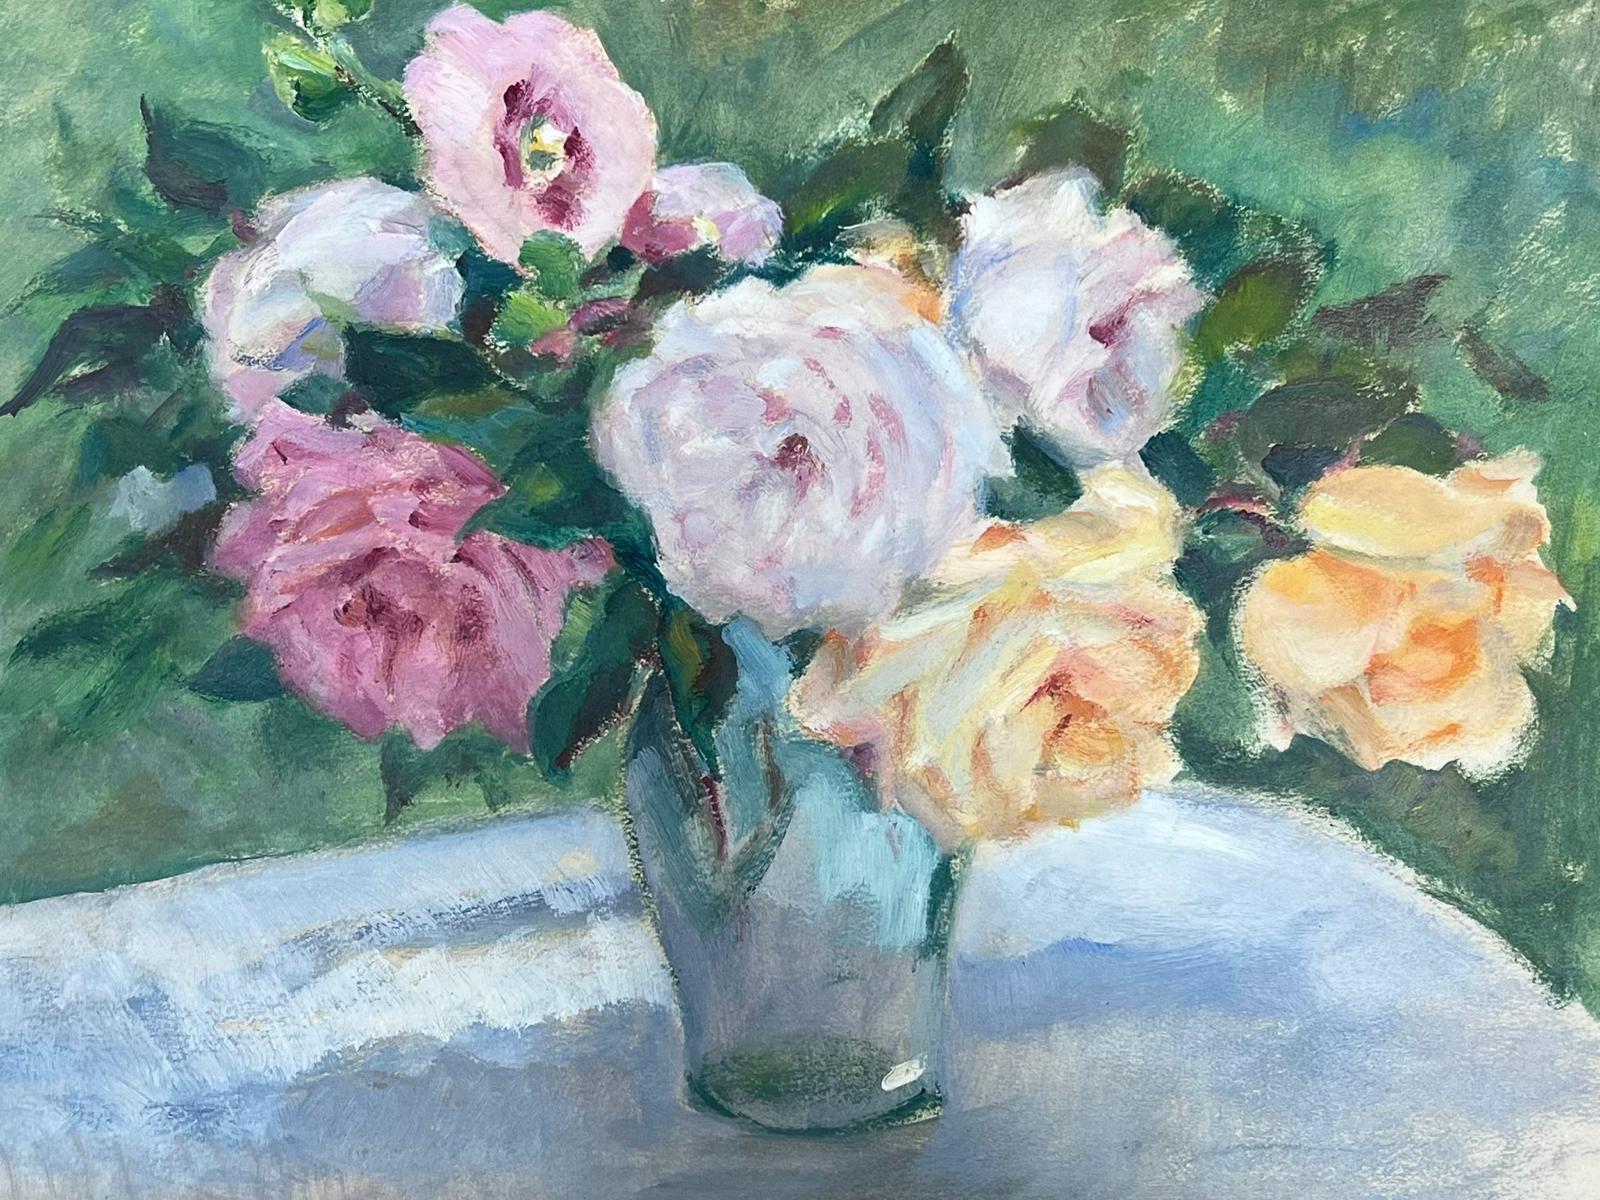 Vintage 1930's French Impressionist Still Life Roses in Glass in Garden - Painting by Louise Alix